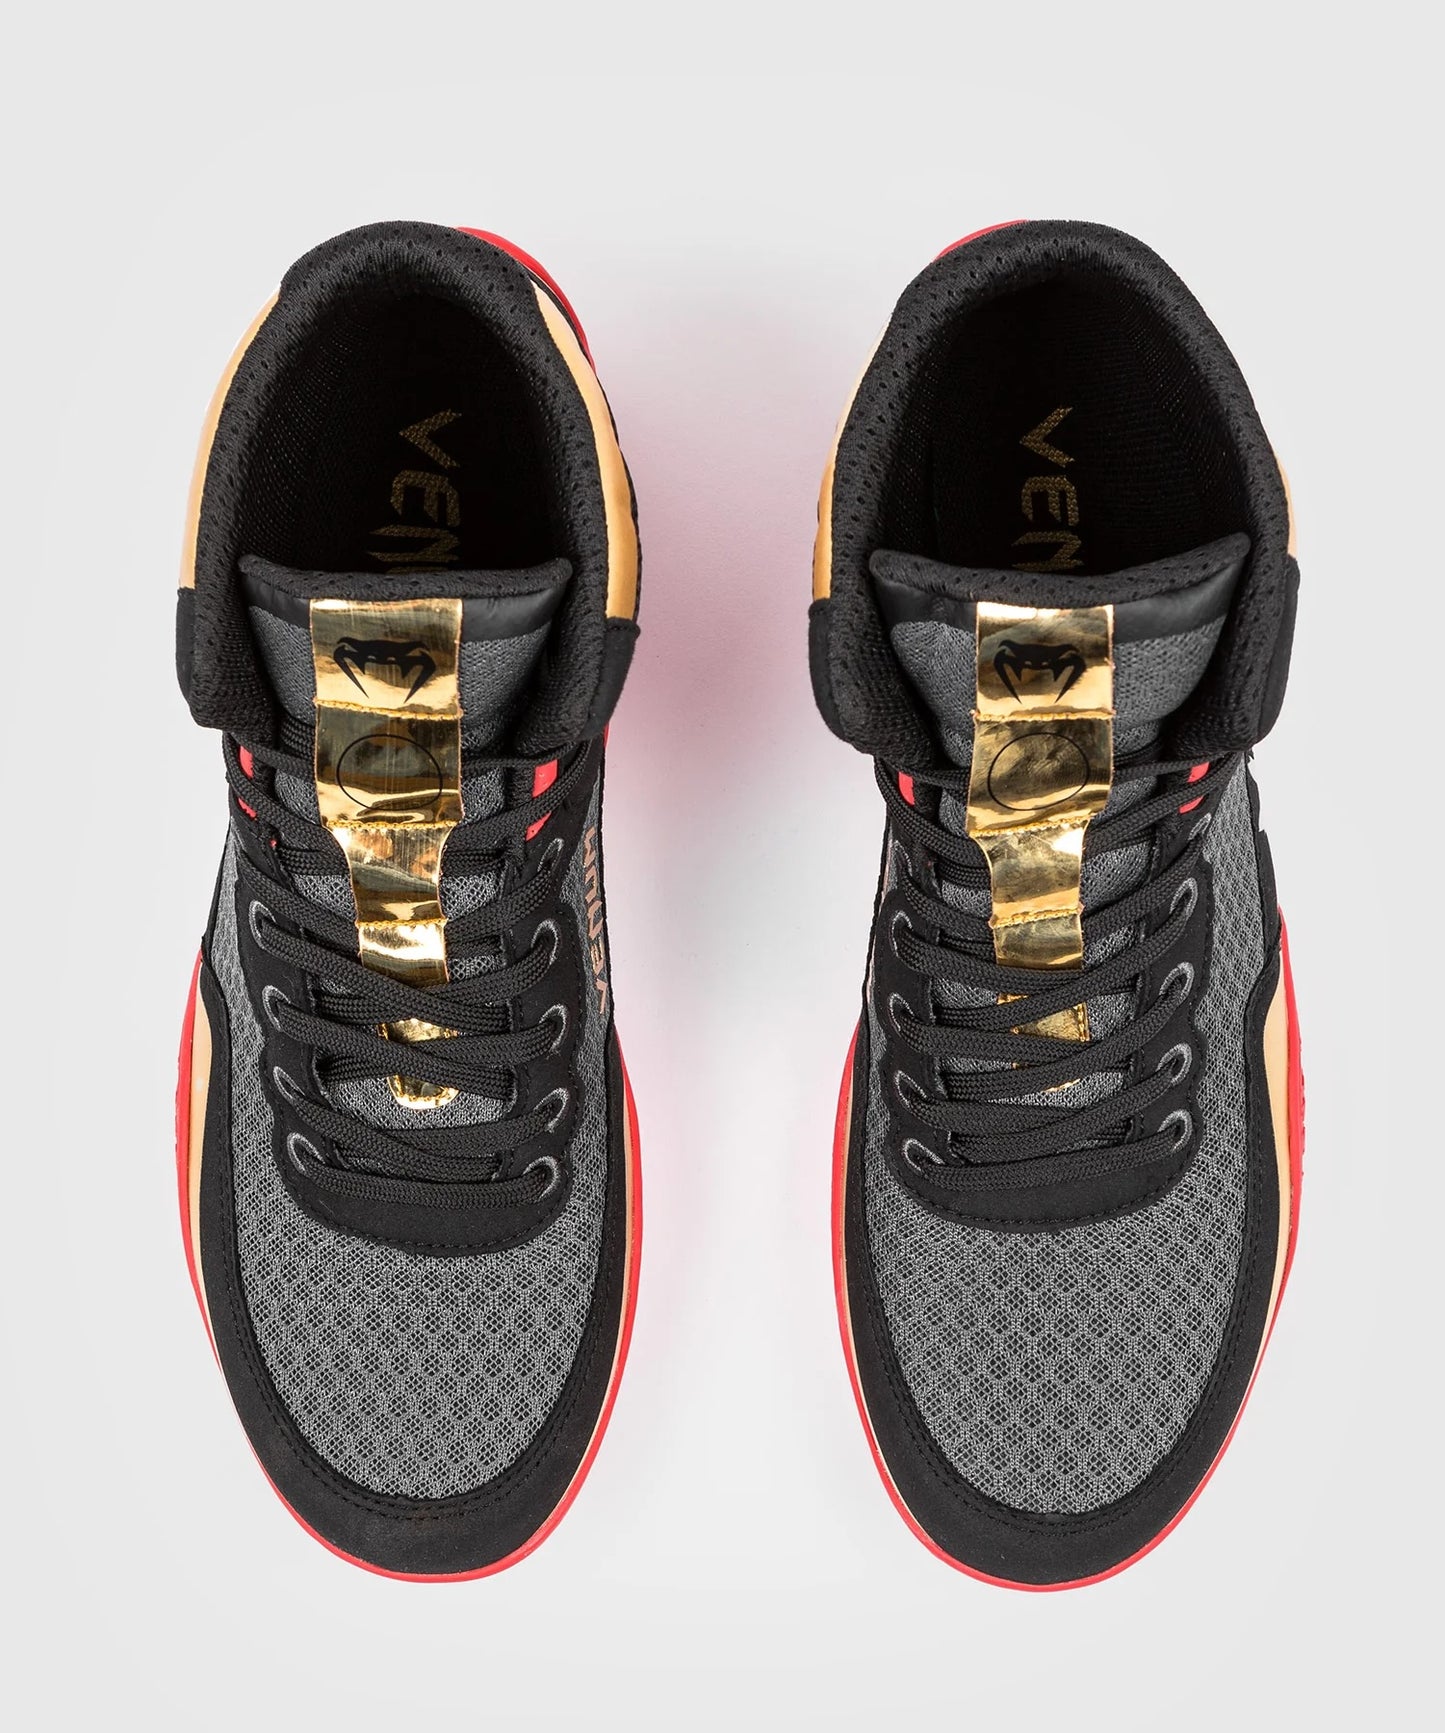 Elite Fitness Shoes - Black Gold Red